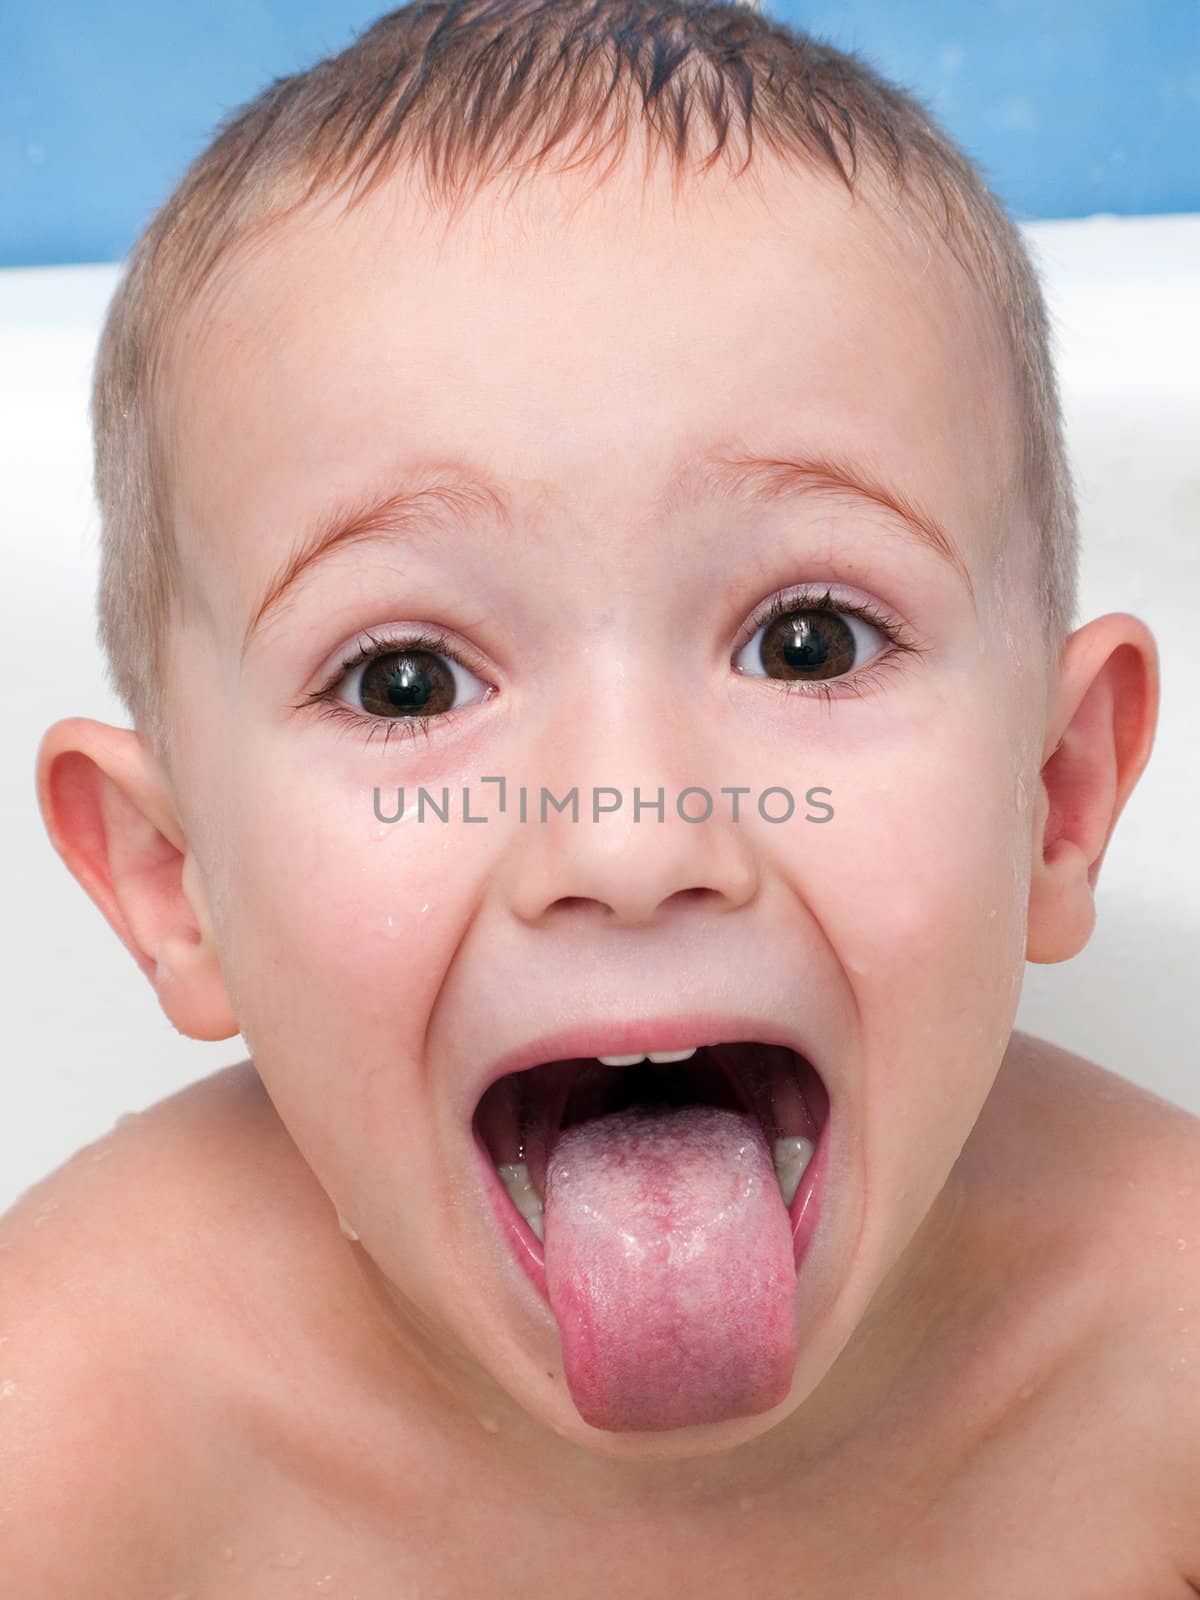 Little child making tongue for fun